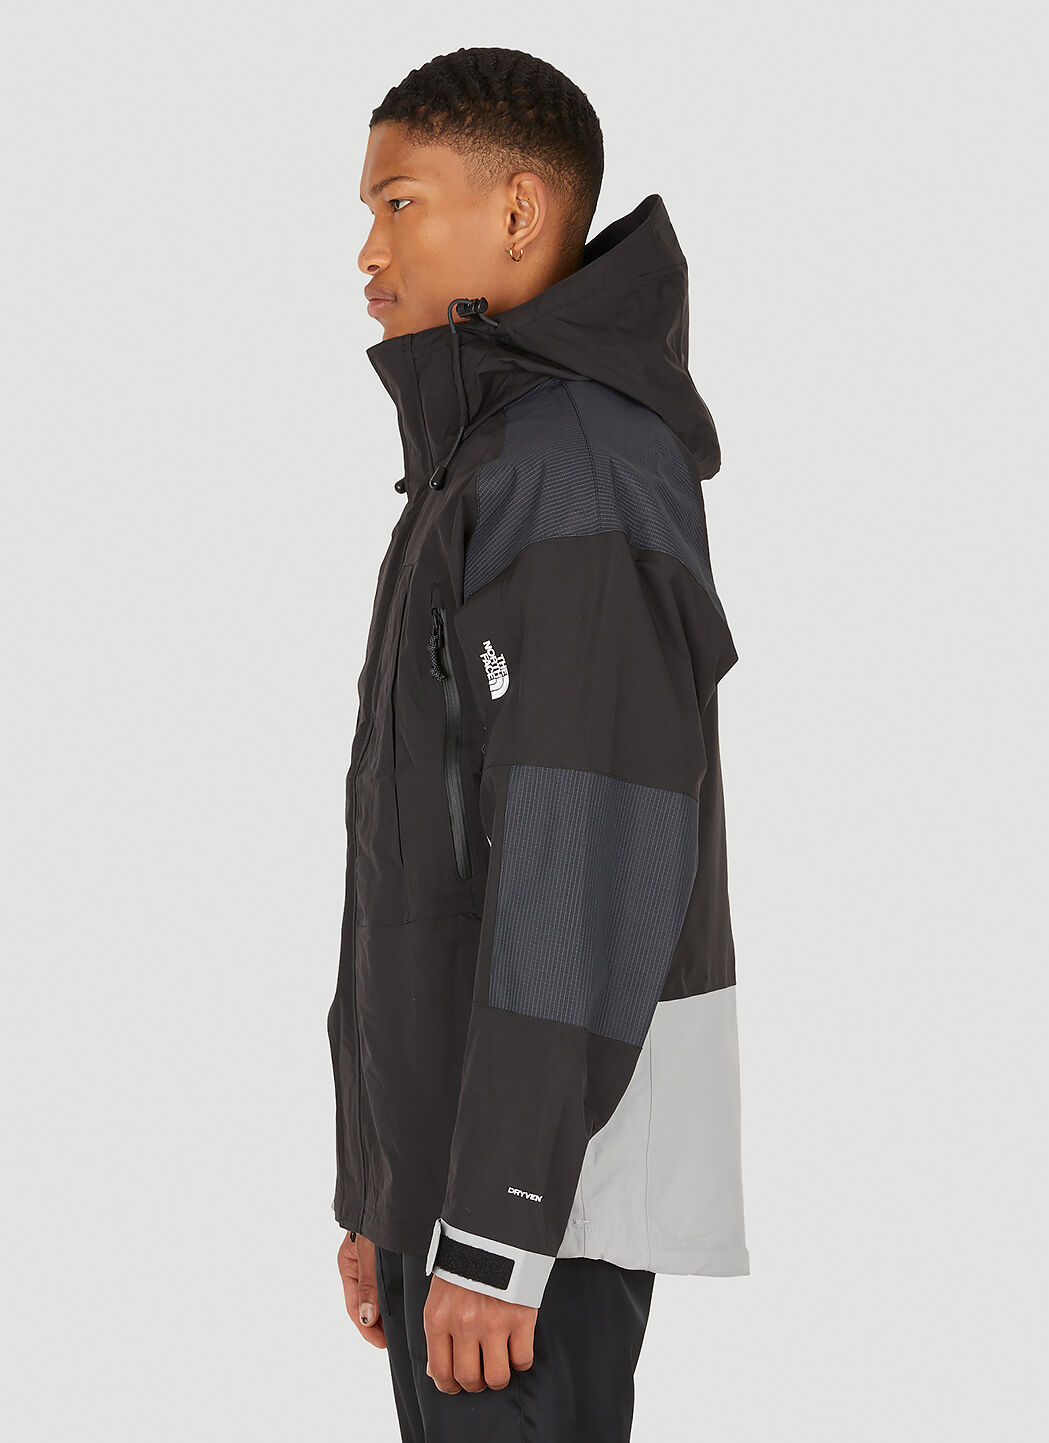 The North Face Black Box Phlego 2L Dryvent Jacket in Black | LN-CC®